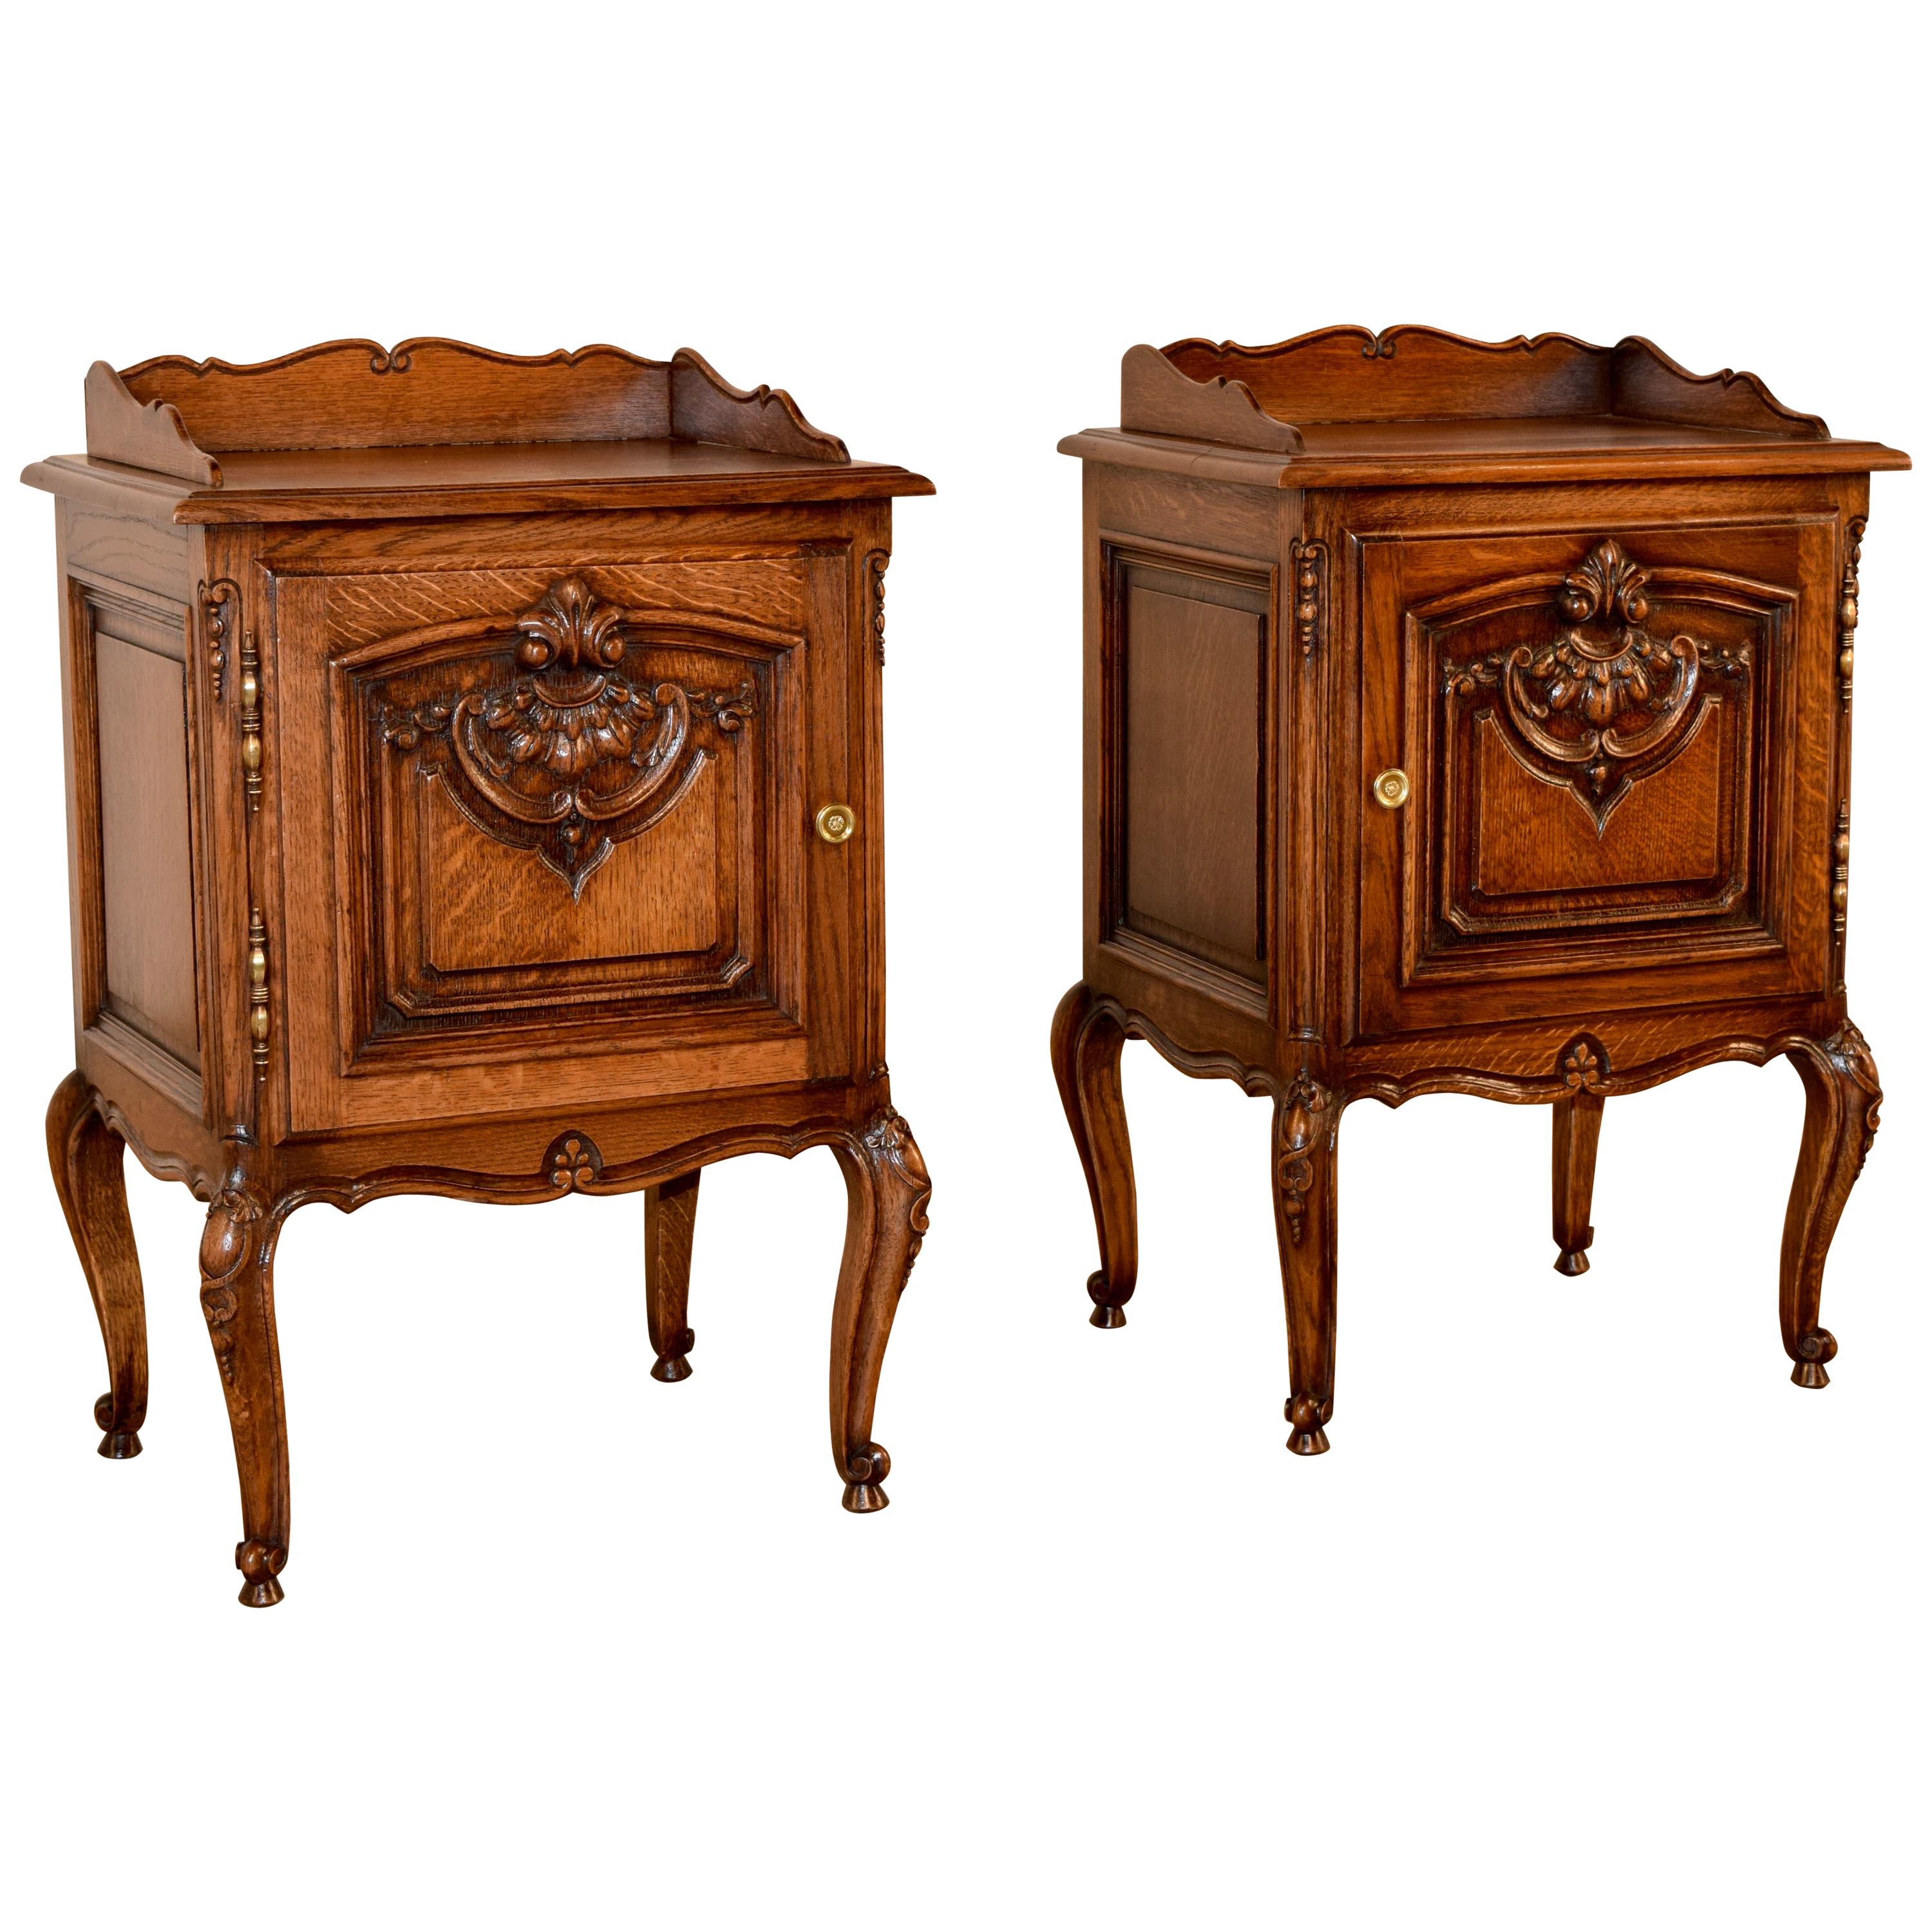 Pair of French Oak Bedsides, circa 1900